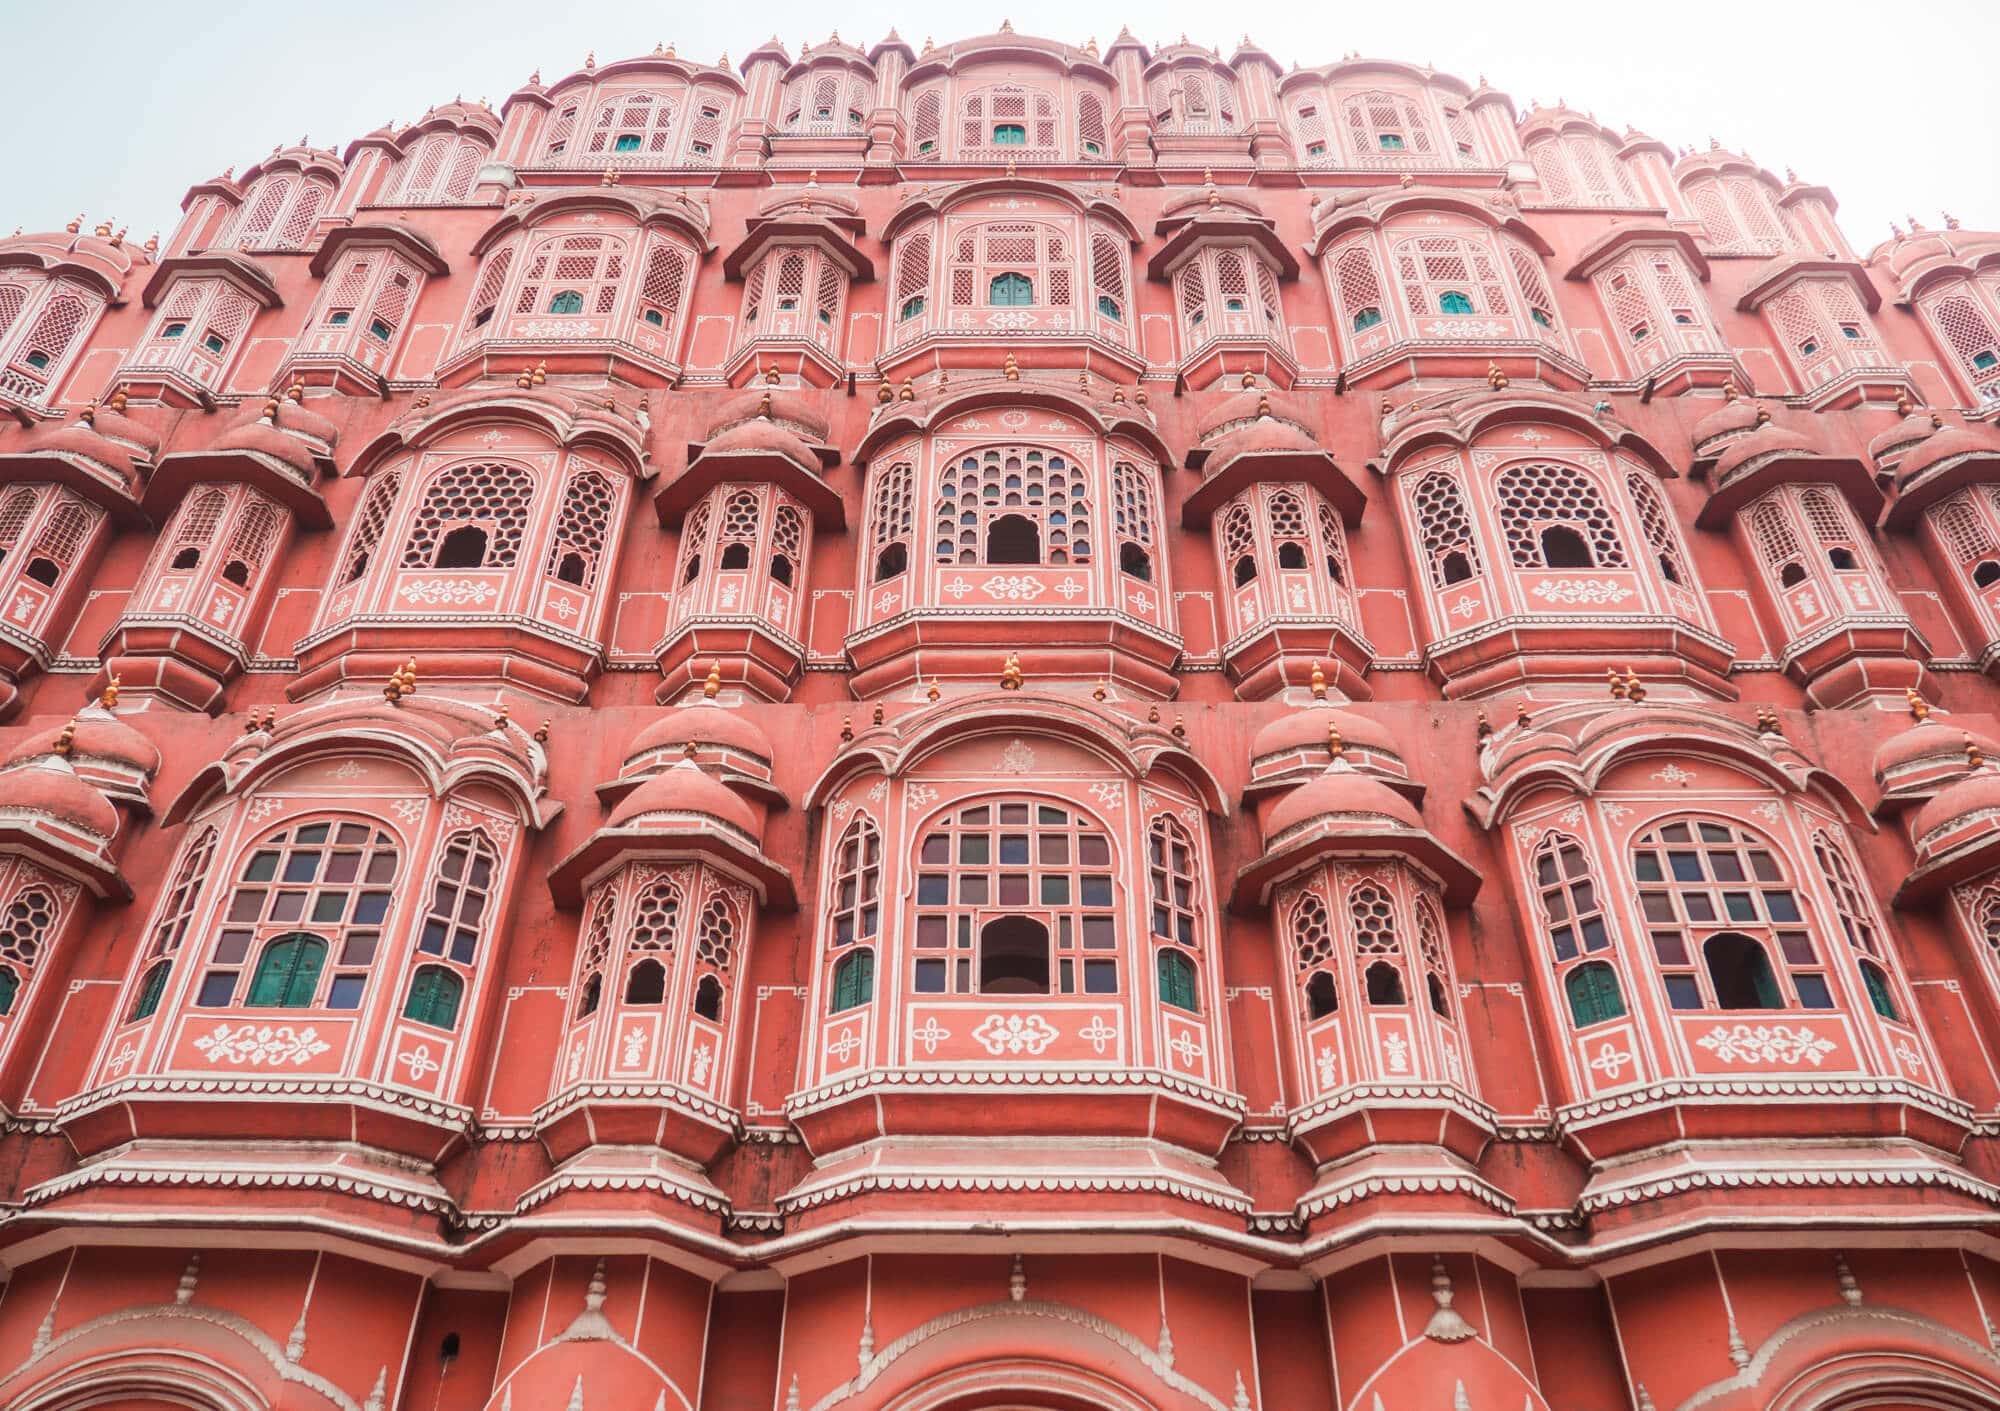 How to spend 2 days in Jaipur - Top 12 sights & attractions